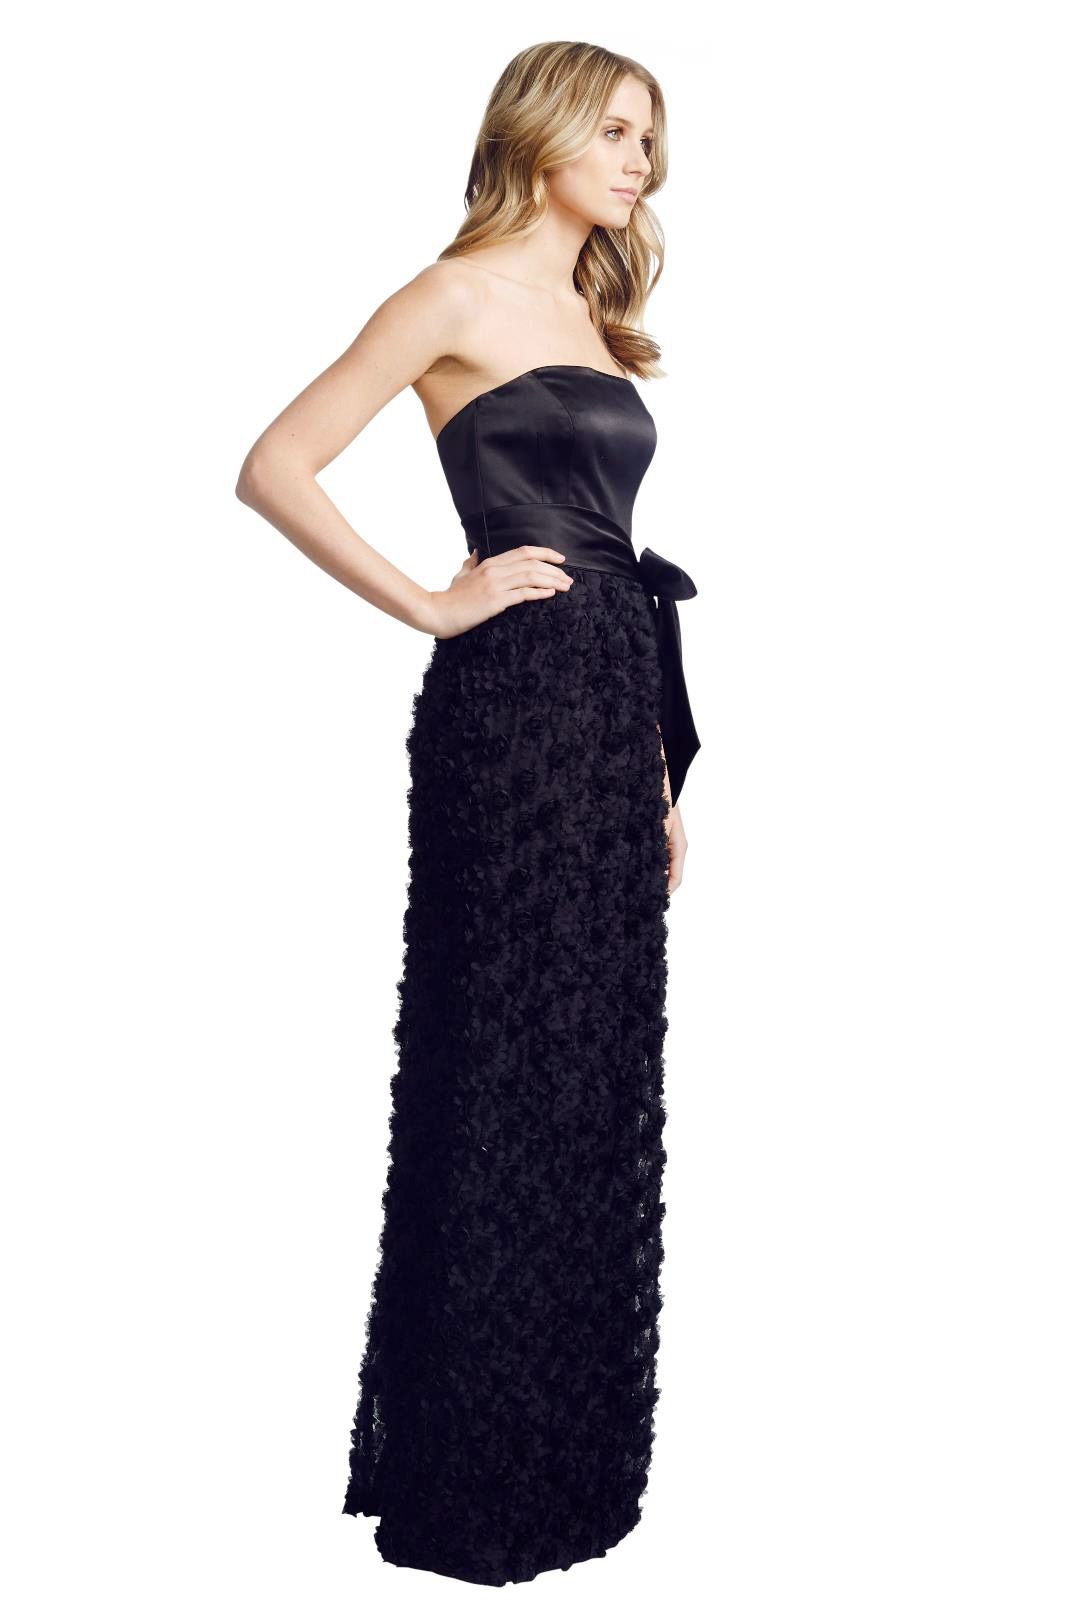 Matthew Eager - Poodle Ball Gown - Black - Side